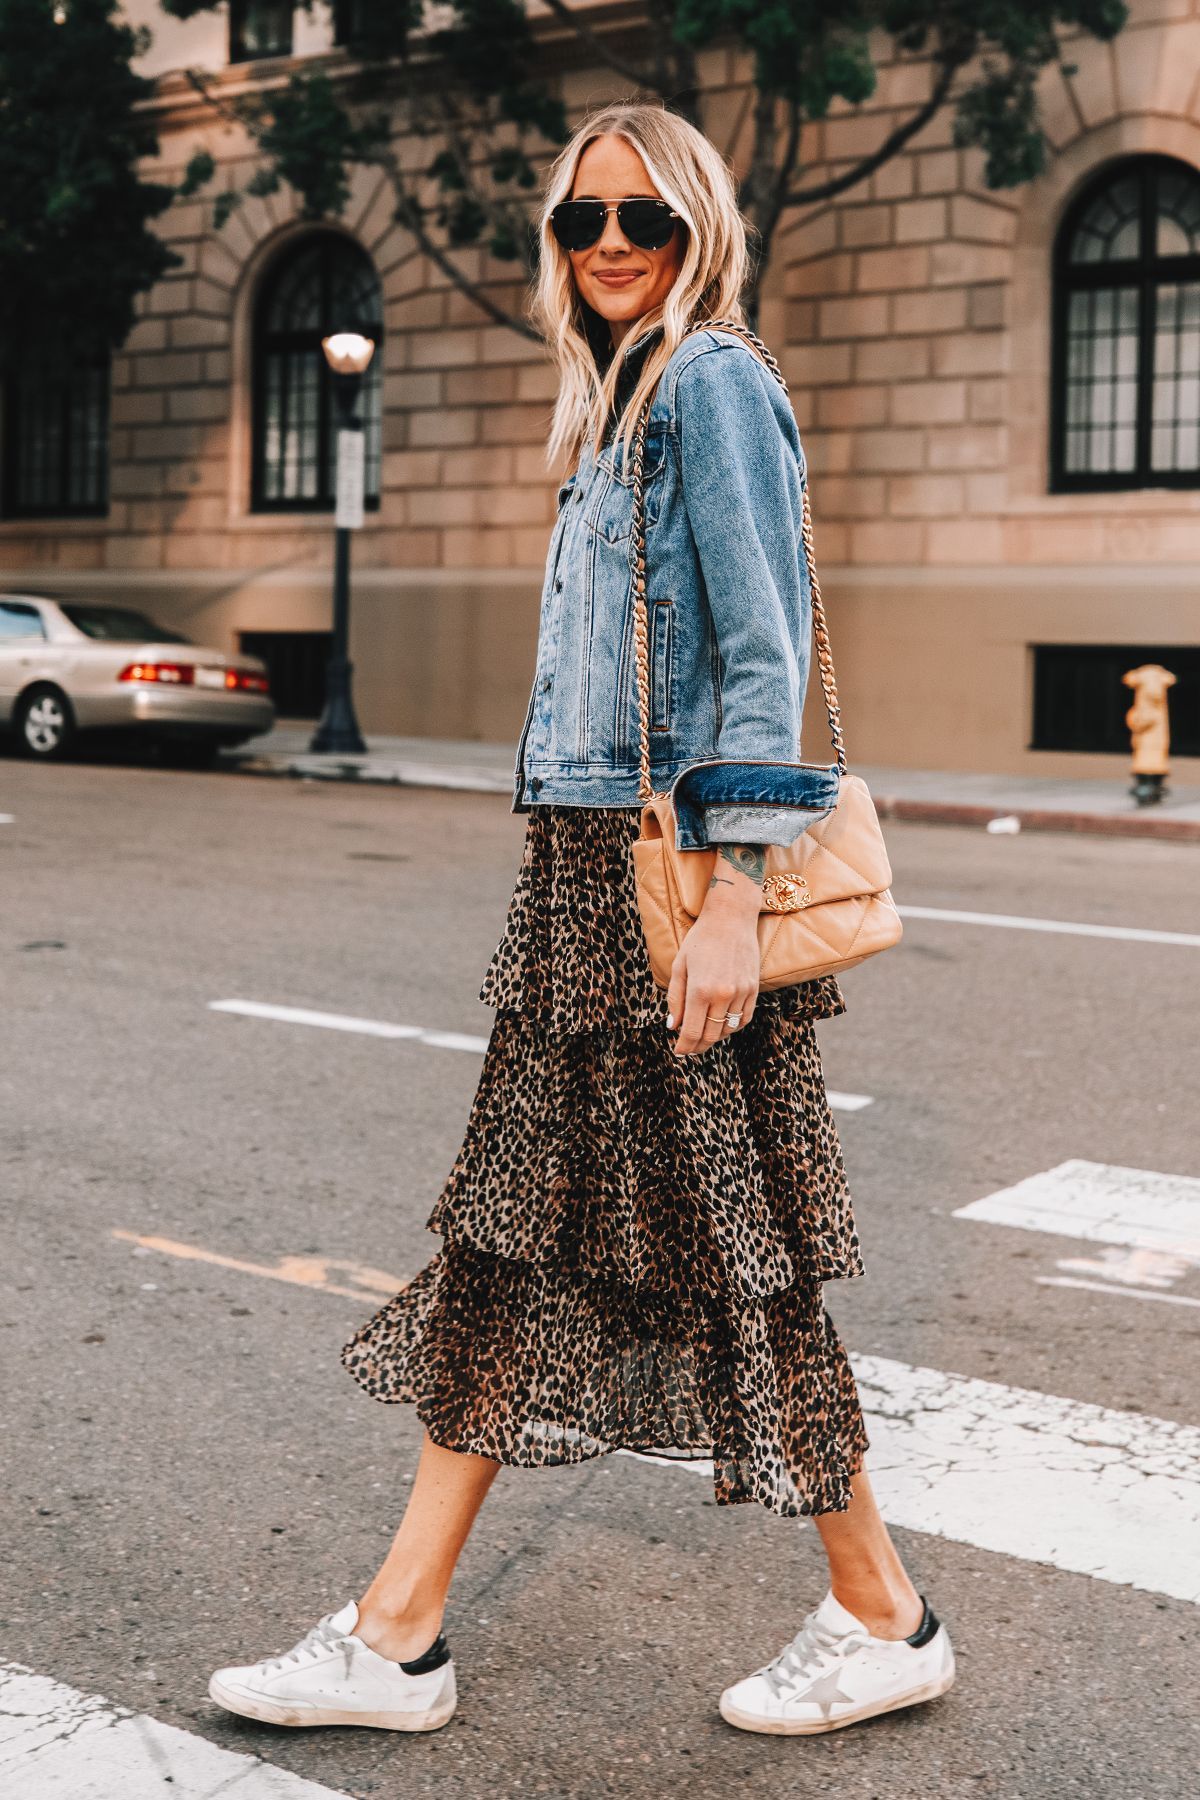 How to Style A Leopard Skirt, How to Wear Leopard | Fashion Jackson - How to Style A Leopard Skirt, How to Wear Leopard | Fashion Jackson -   22 style Inspiration sneakers ideas